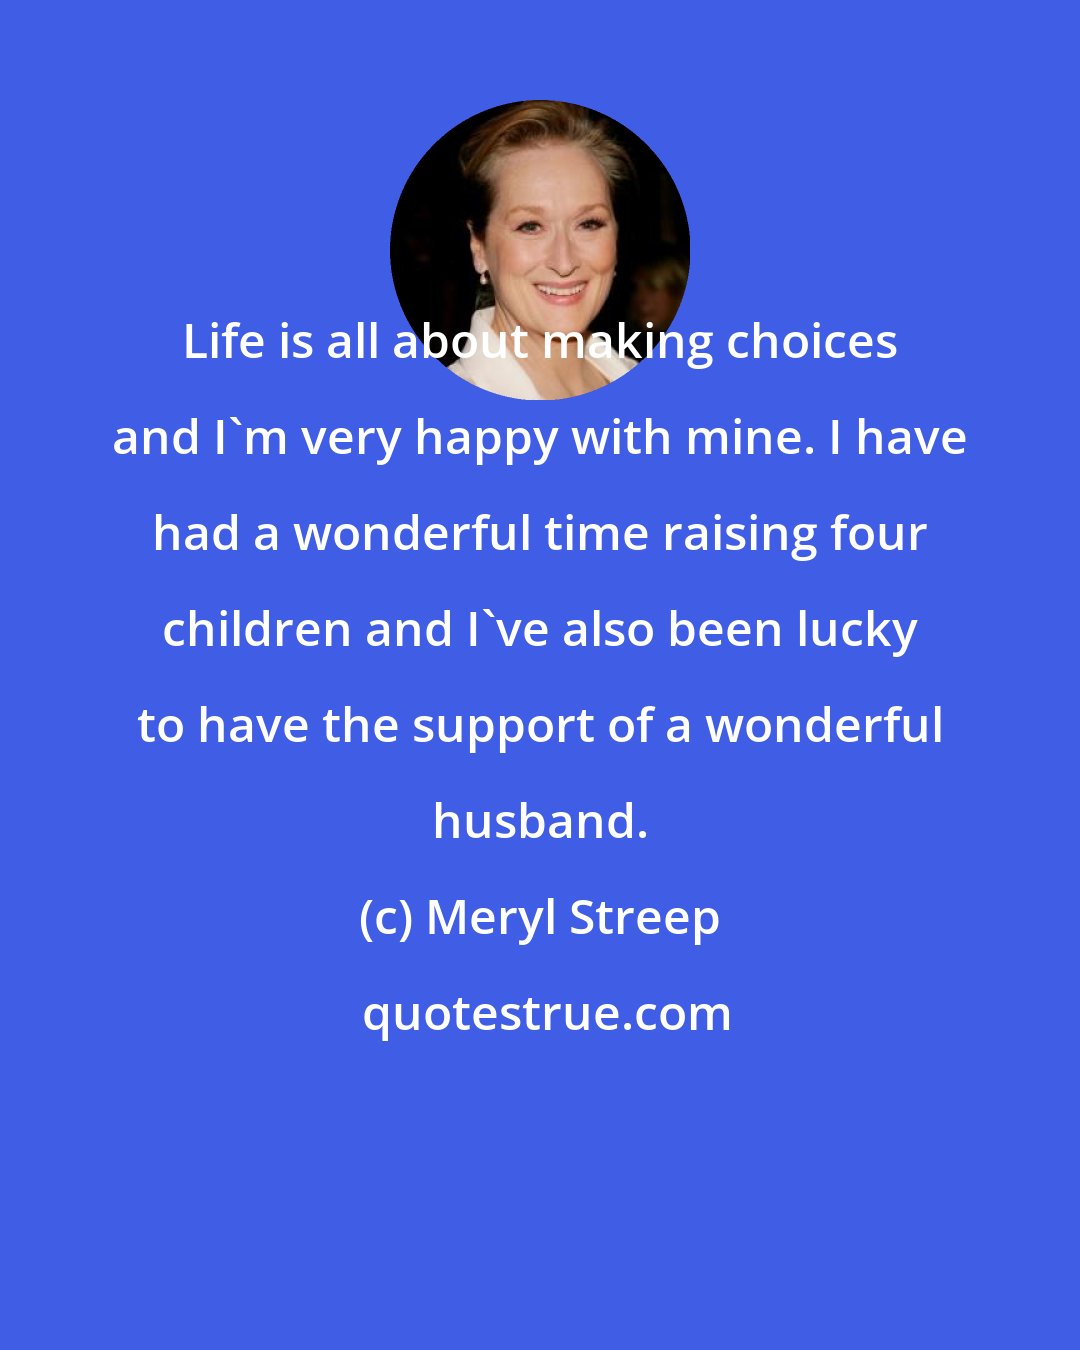 Meryl Streep: Life is all about making choices and I'm very happy with mine. I have had a wonderful time raising four children and I've also been lucky to have the support of a wonderful husband.